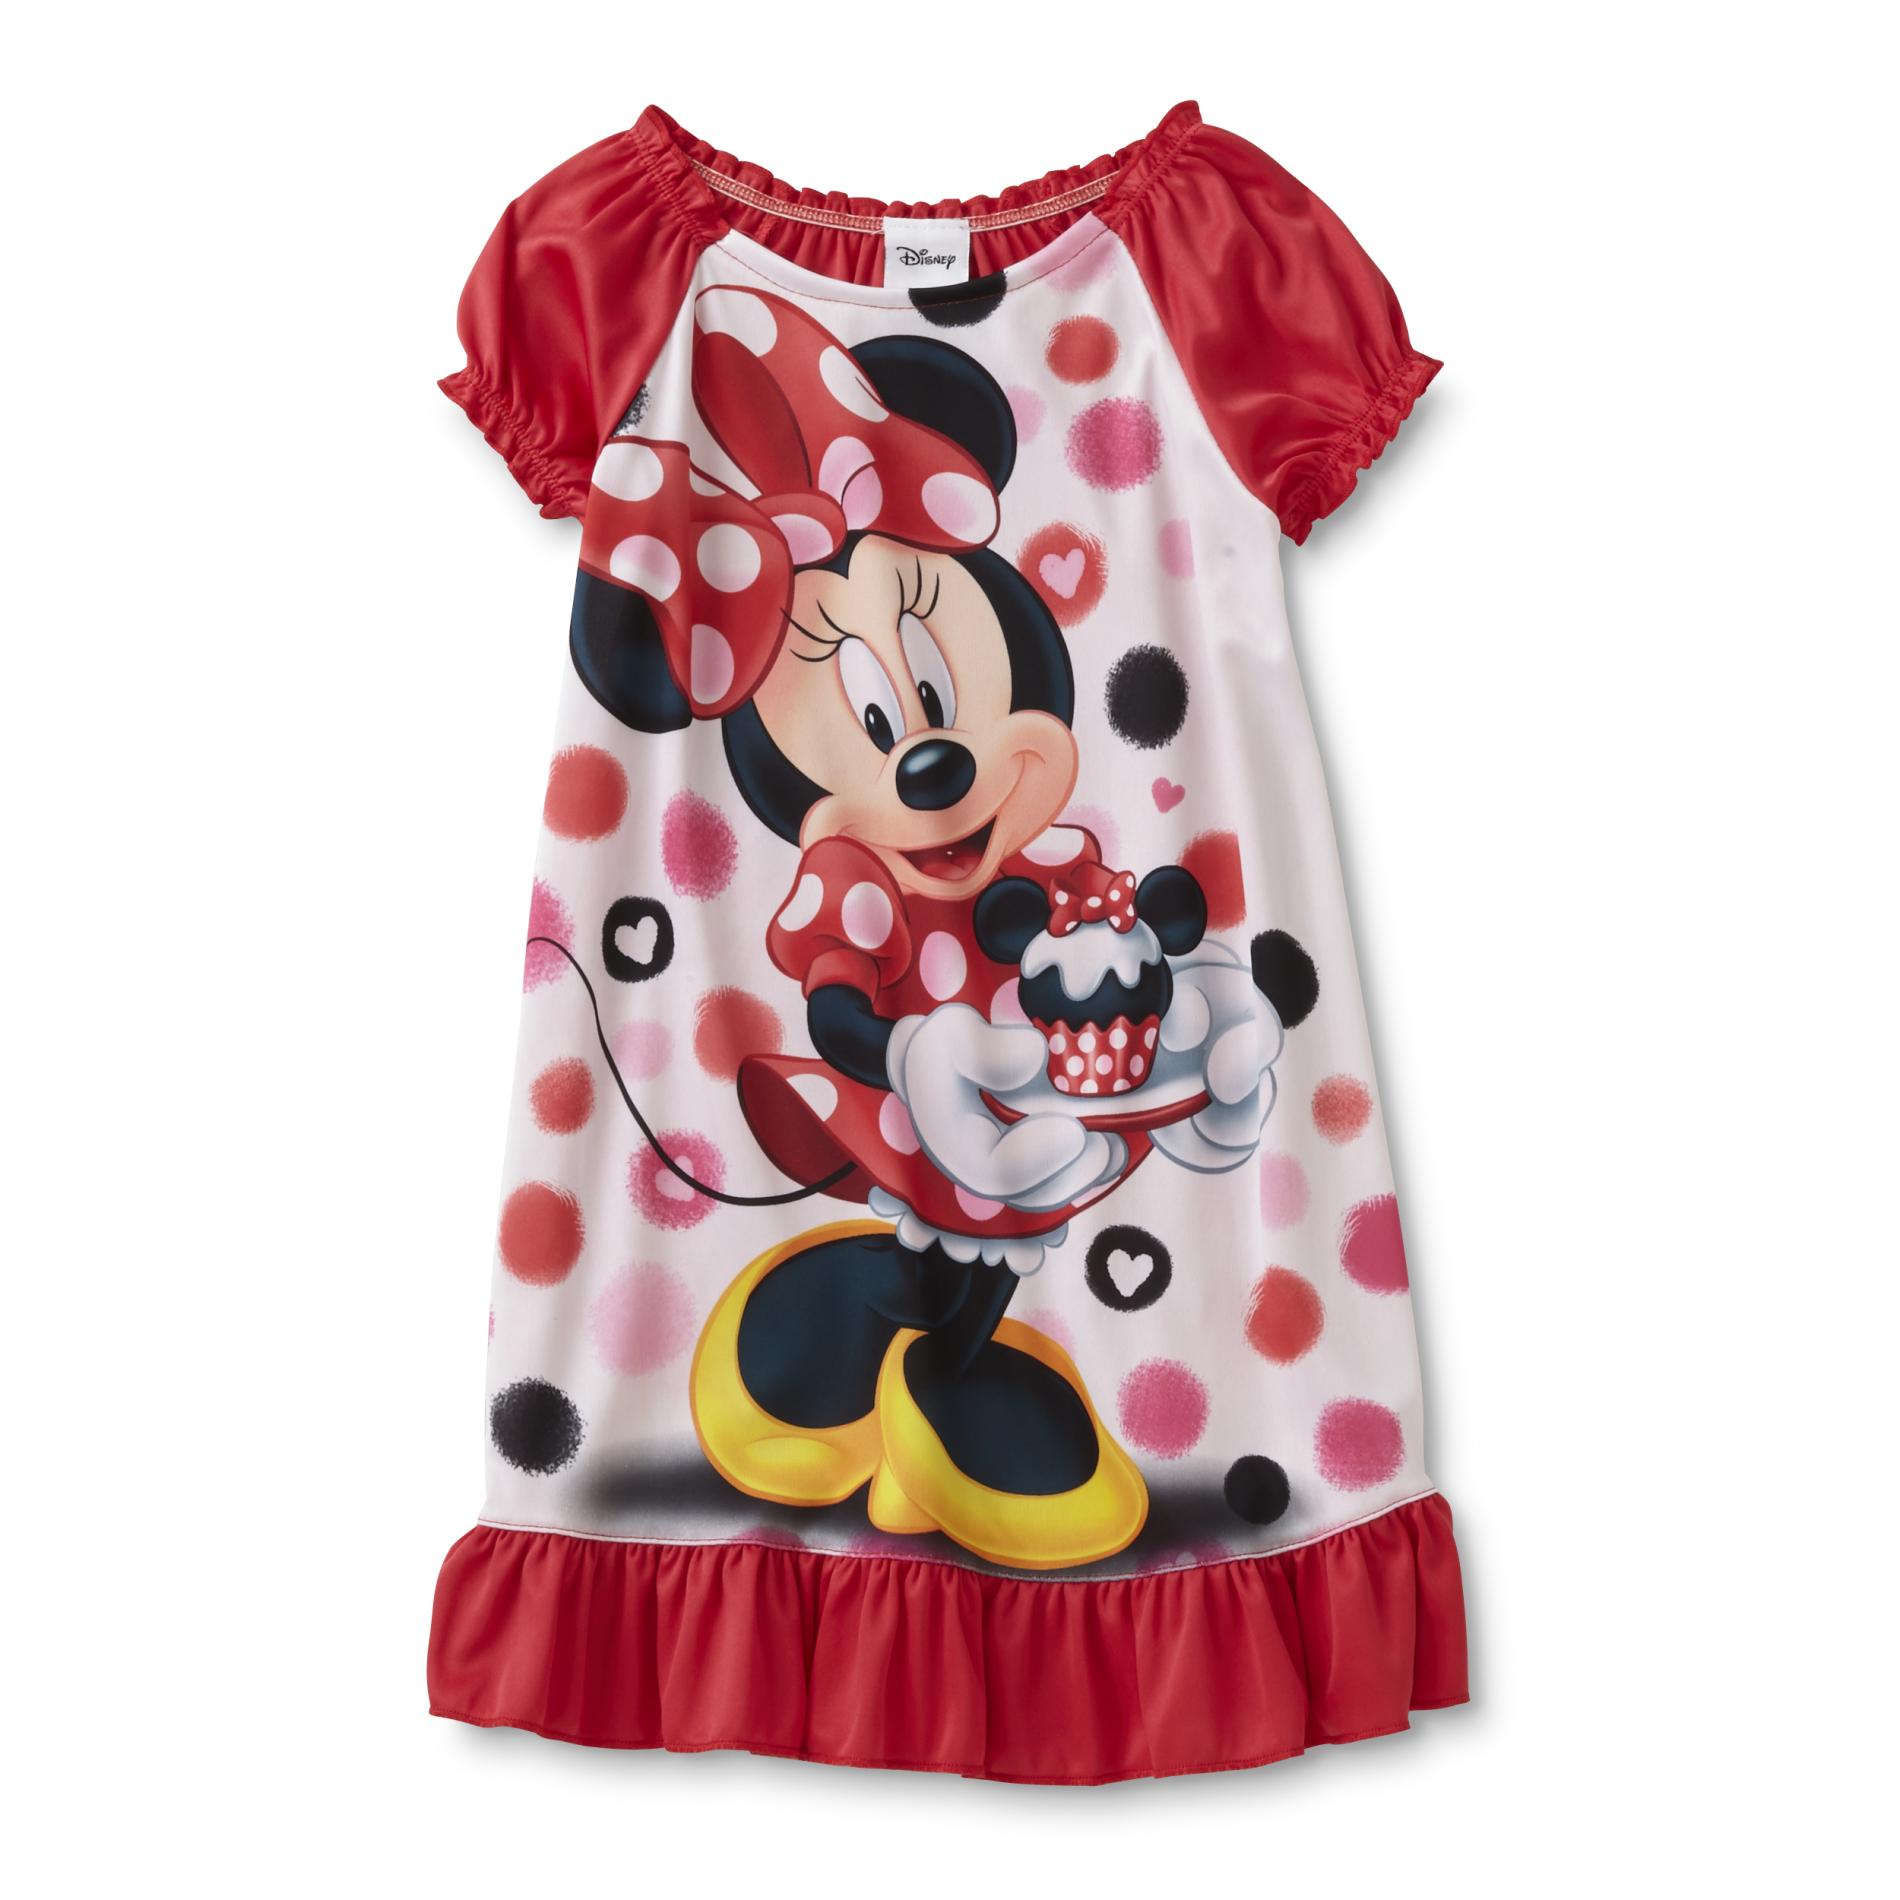 Minnie Mouse Infant & Toddler Girl's Nightgown